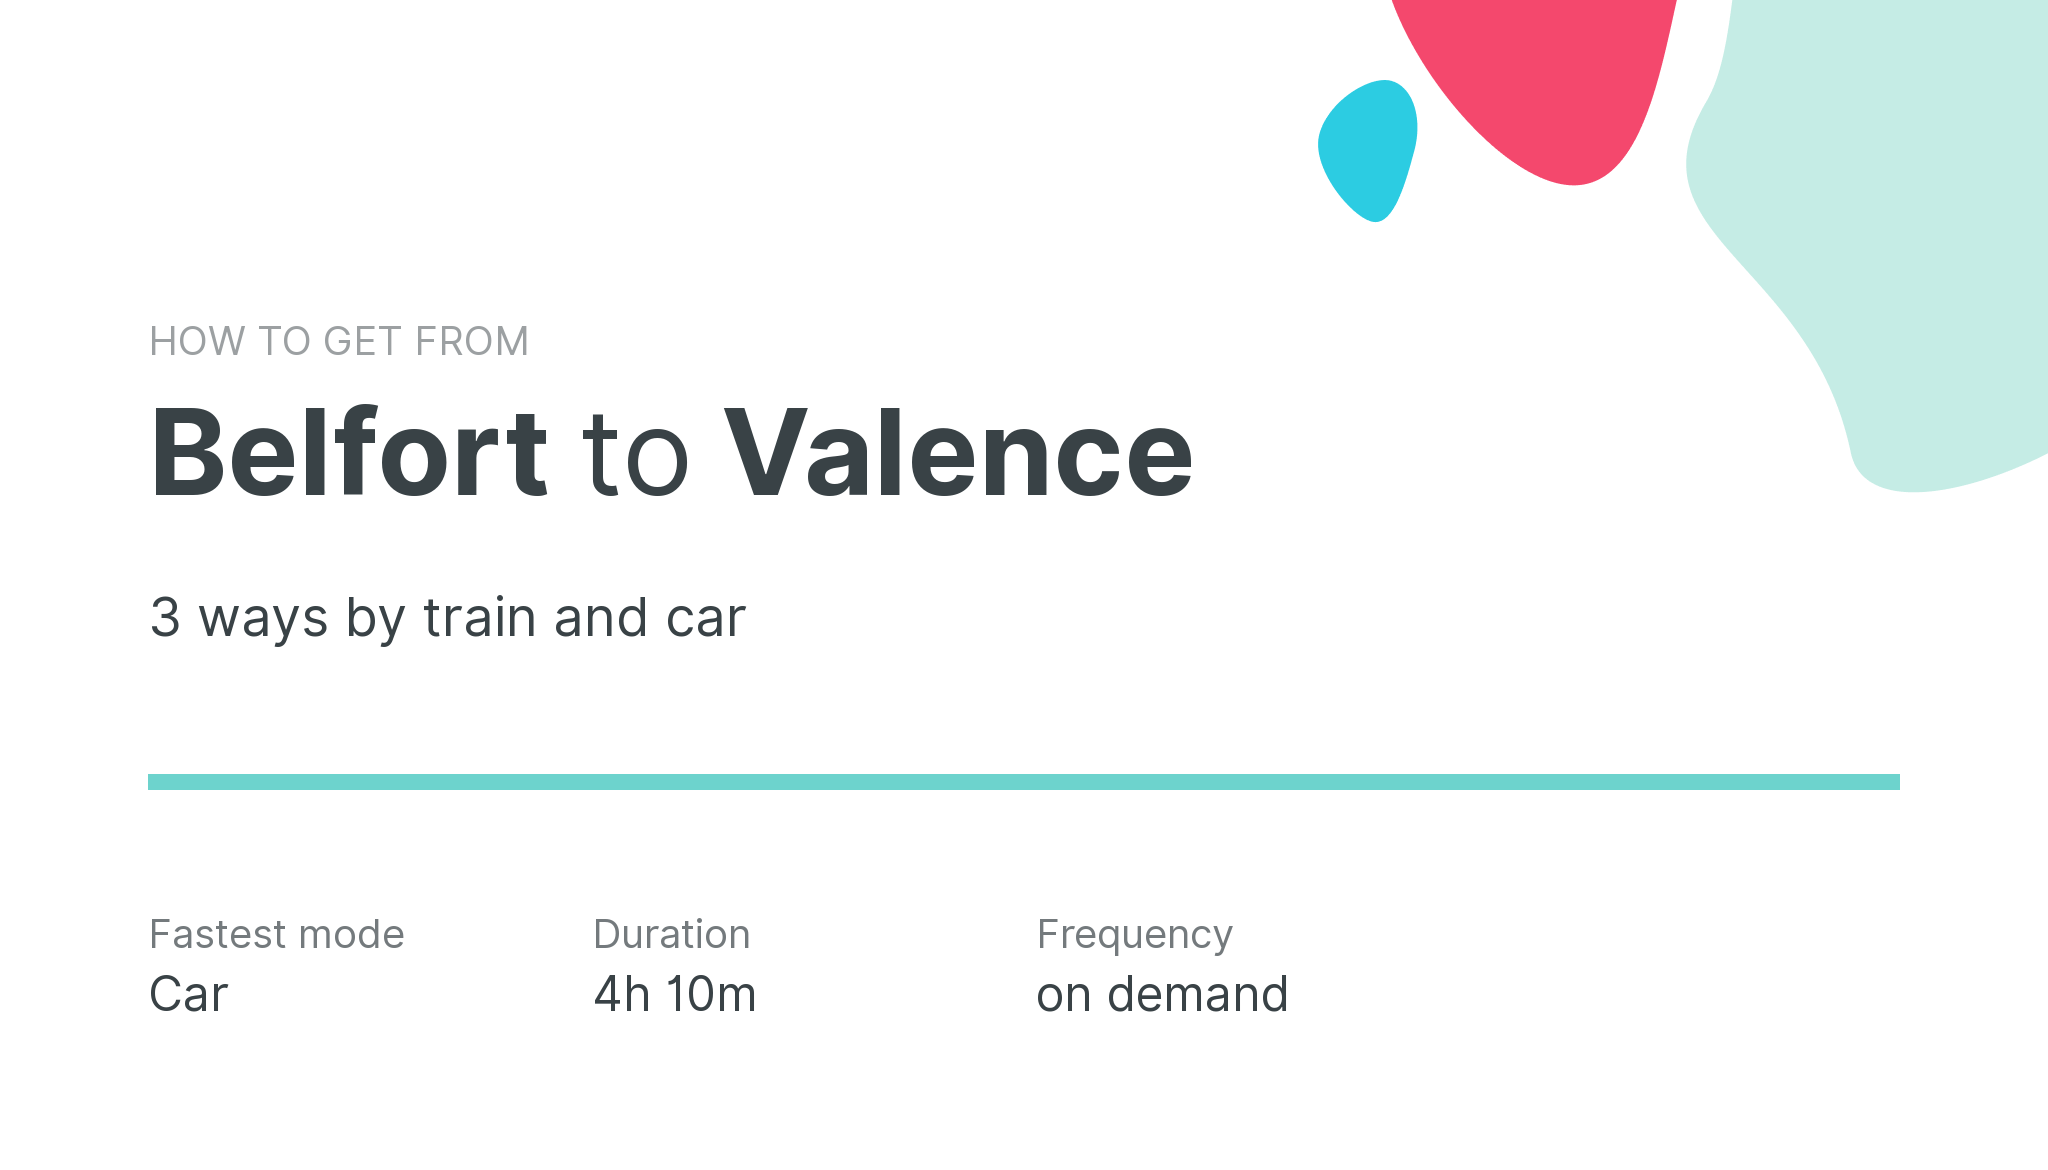 How do I get from Belfort to Valence